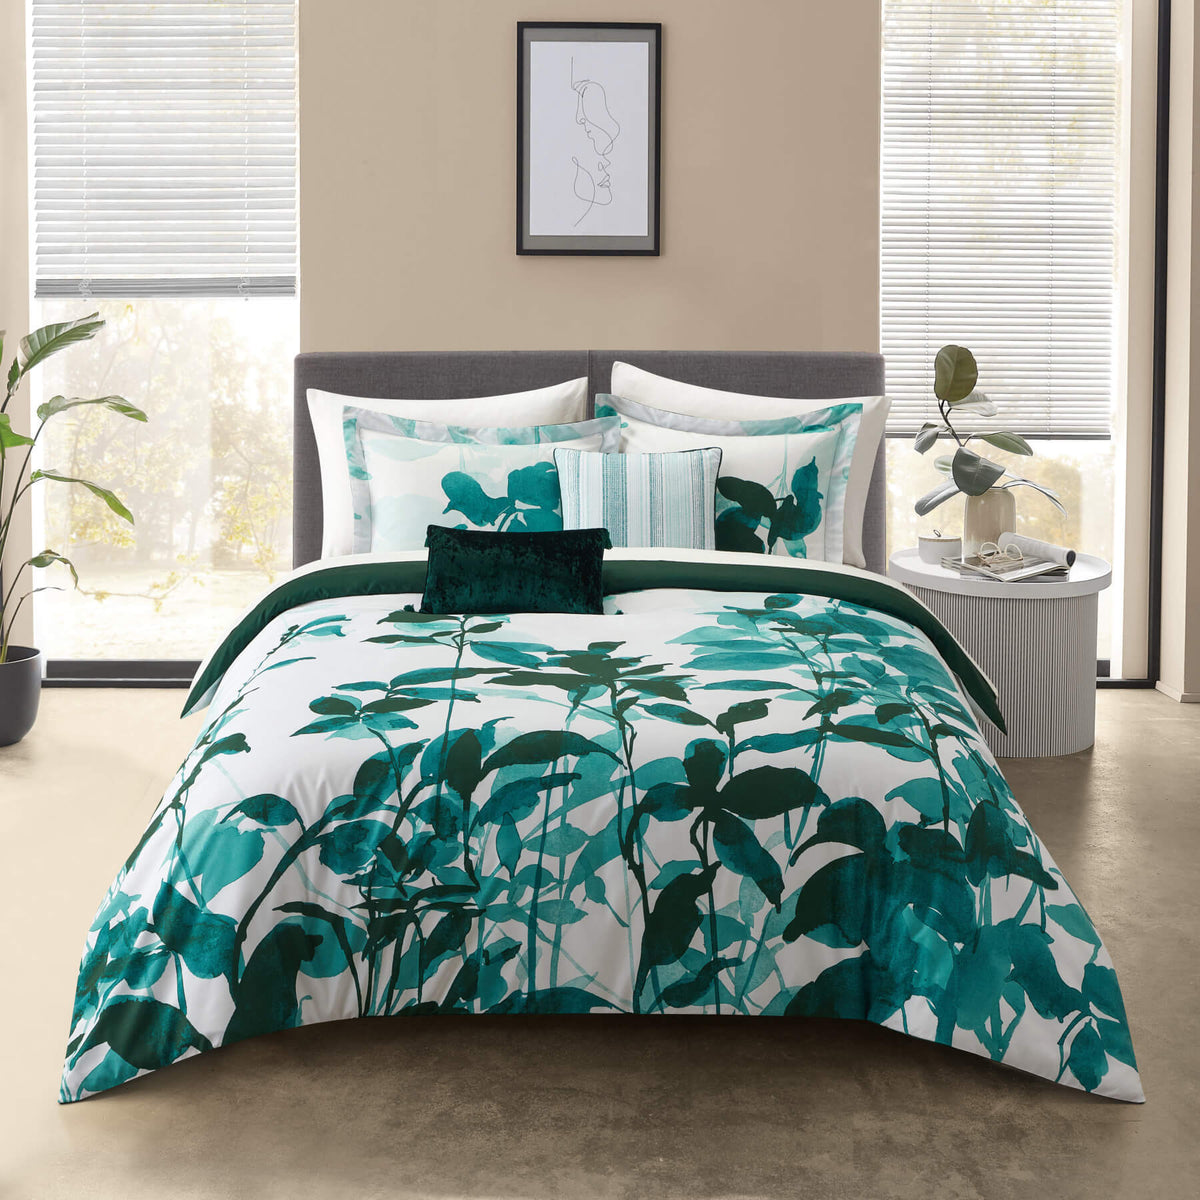 Chic Home Ione 9 Piece Watercolor Floral Comforter Set-Green